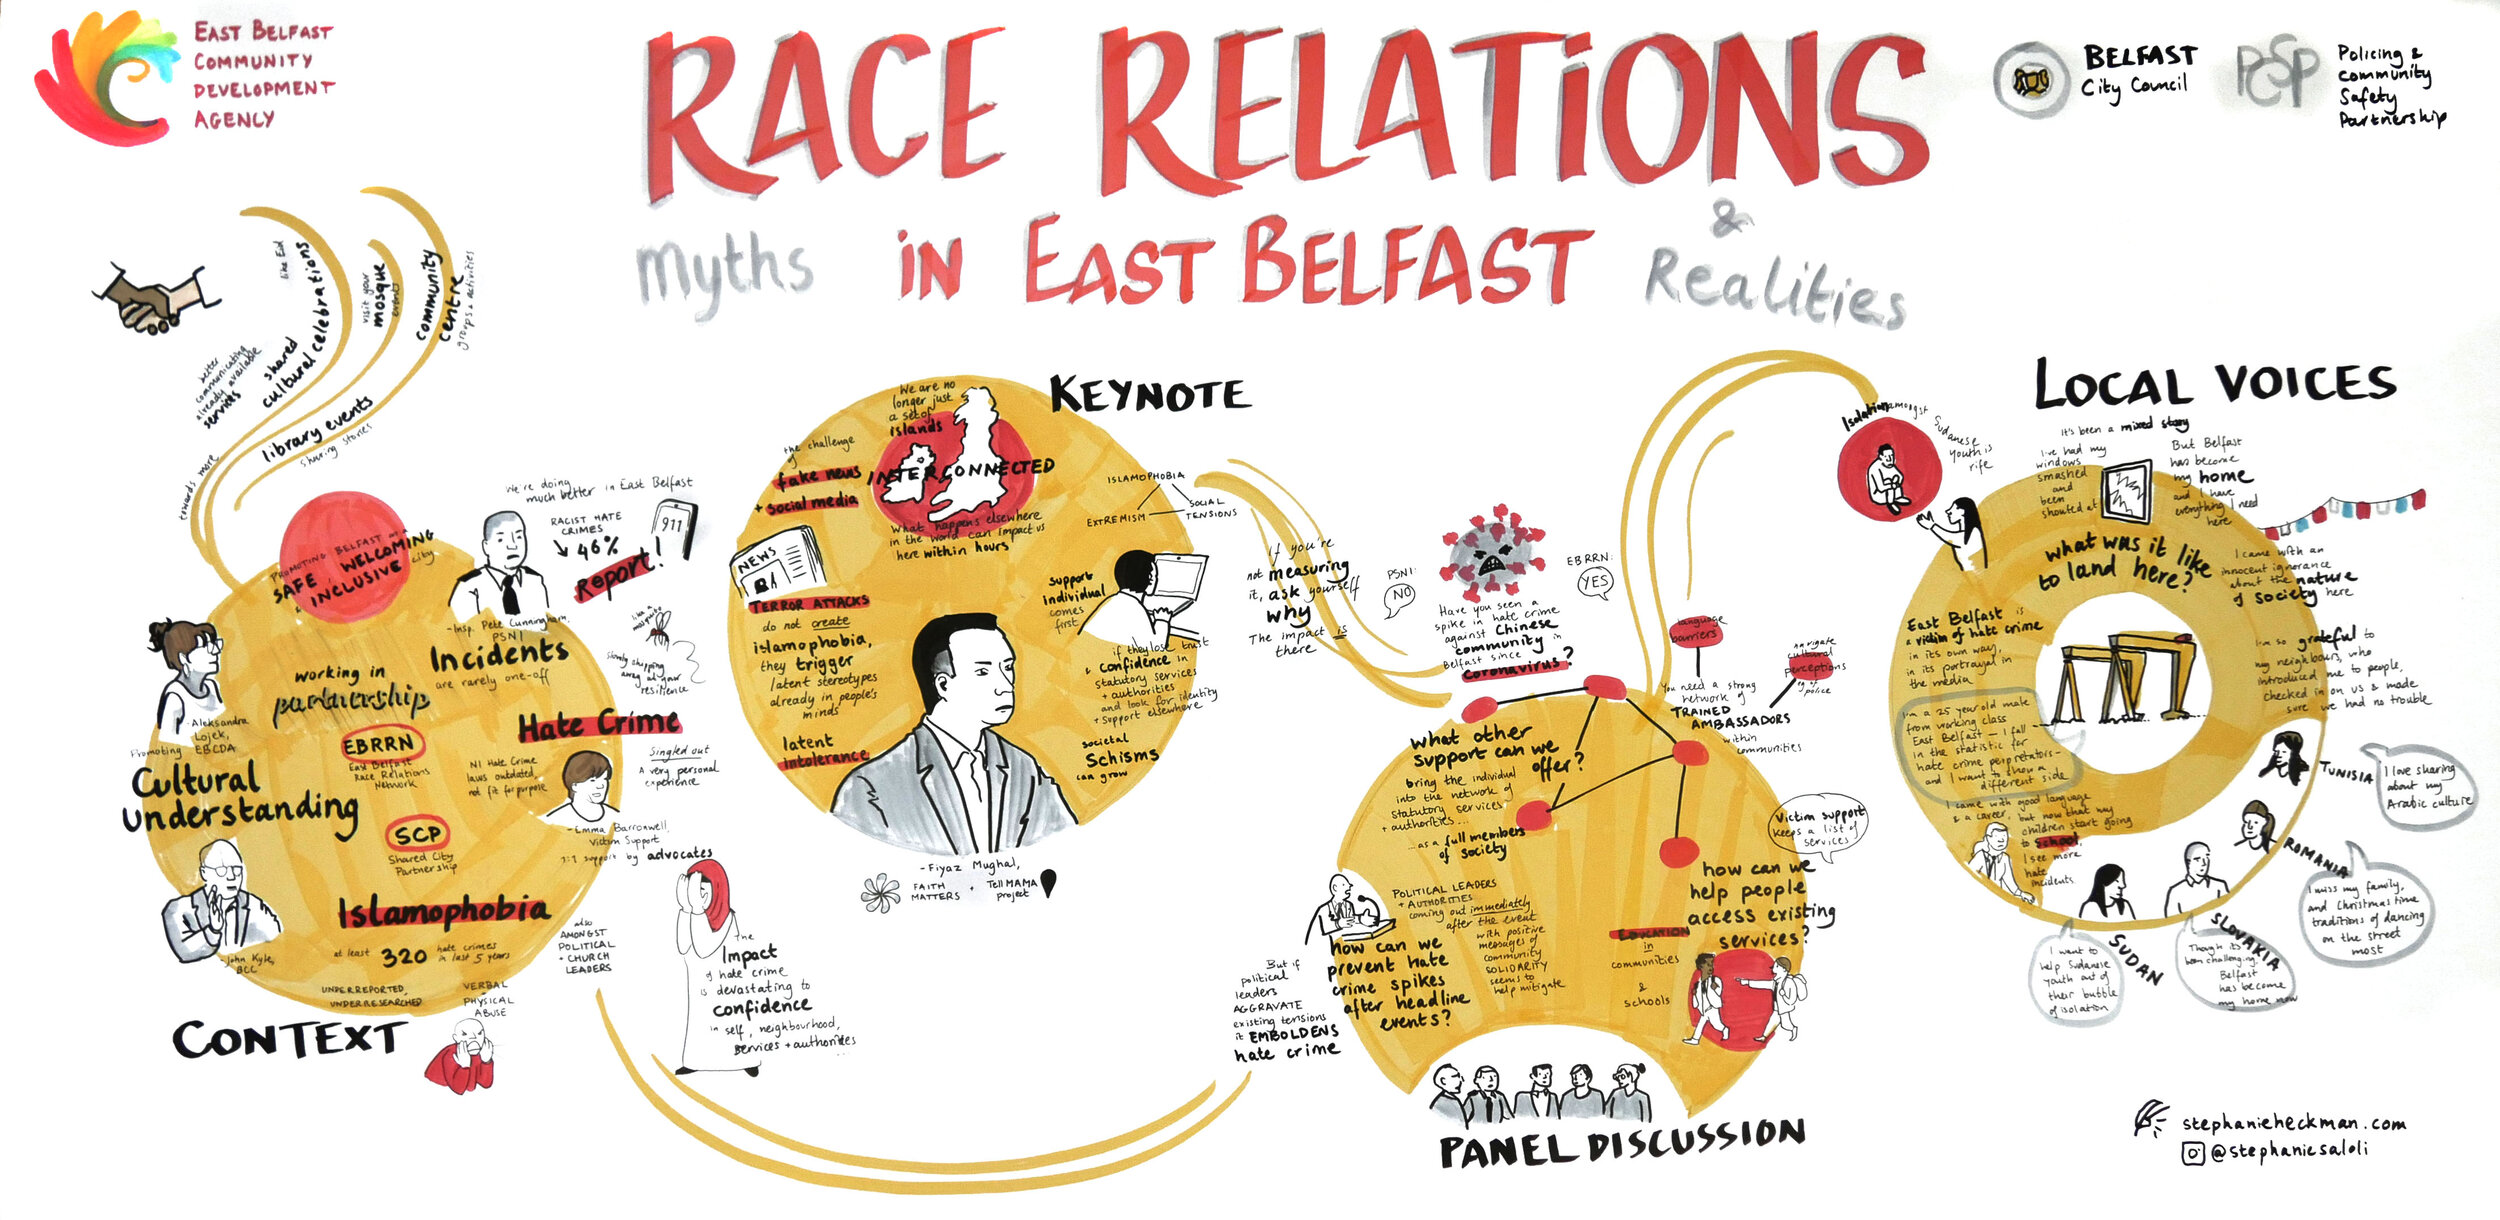 2020 - Race Relations conference with East Belfast Community Development Agency